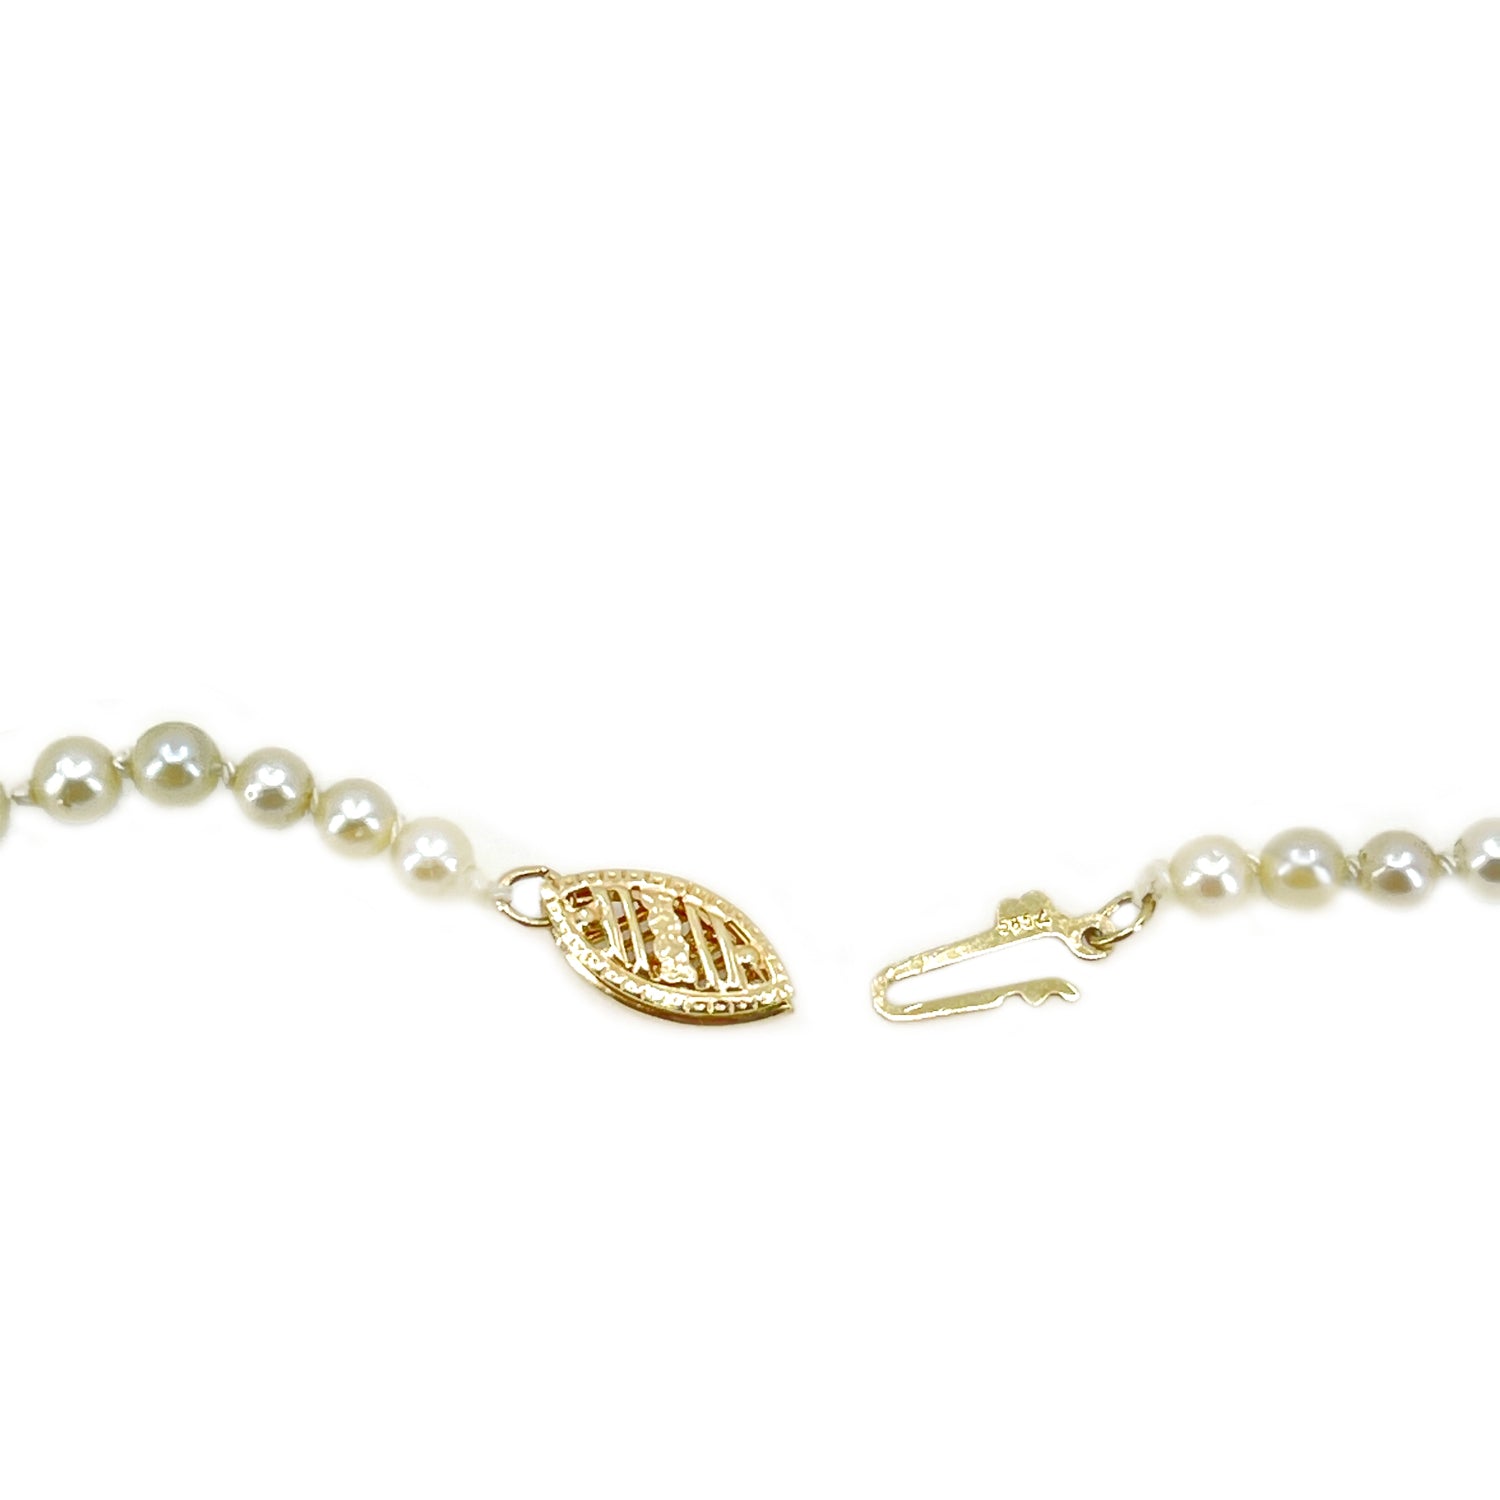 Graduated Estate Japanese Cultured Saltwater Akoya Pearl Vintage Necklace - 14K Yellow Gold 20.50 Inch